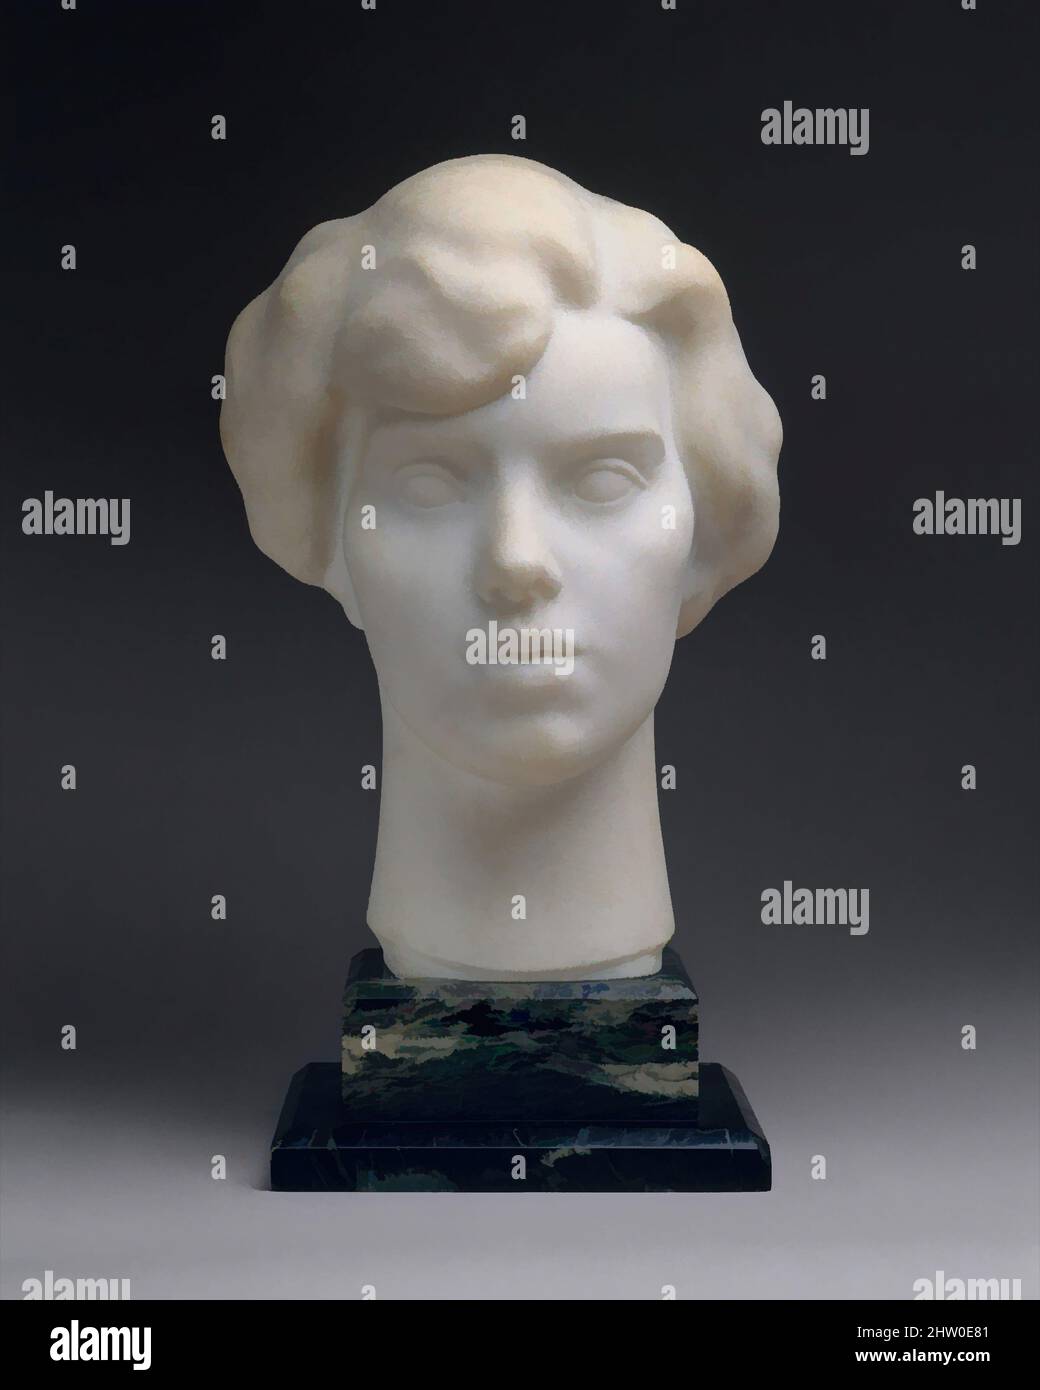 Art inspired by Antoinette Kraushaar, 1923, Marble, 12 1/4 x 8 1/4 x 9 1/ 2 in. (31.1 x 21 x 24.1 cm) not including base., Sculpture, Gaston Lachaise (American (born France) 1882–1935, Classic works modernized by Artotop with a splash of modernity. Shapes, color and value, eye-catching visual impact on art. Emotions through freedom of artworks in a contemporary way. A timeless message pursuing a wildly creative new direction. Artists turning to the digital medium and creating the Artotop NFT Stock Photo